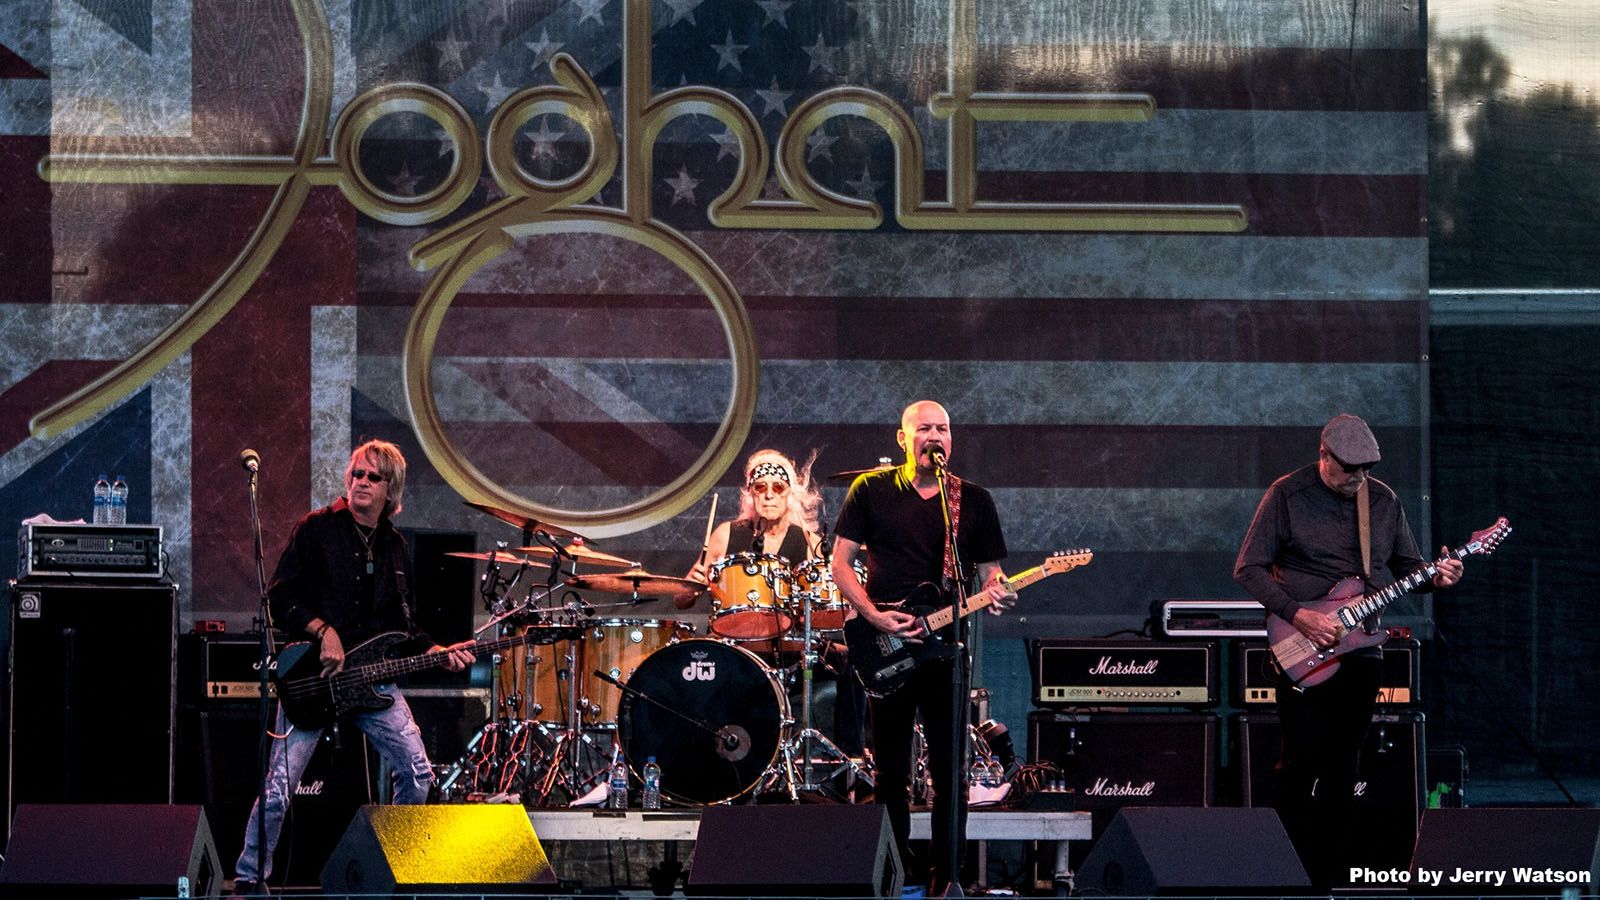 Foghat will perform at Niswonger Performing Arts Center in Van Wert on Friday, March 29.